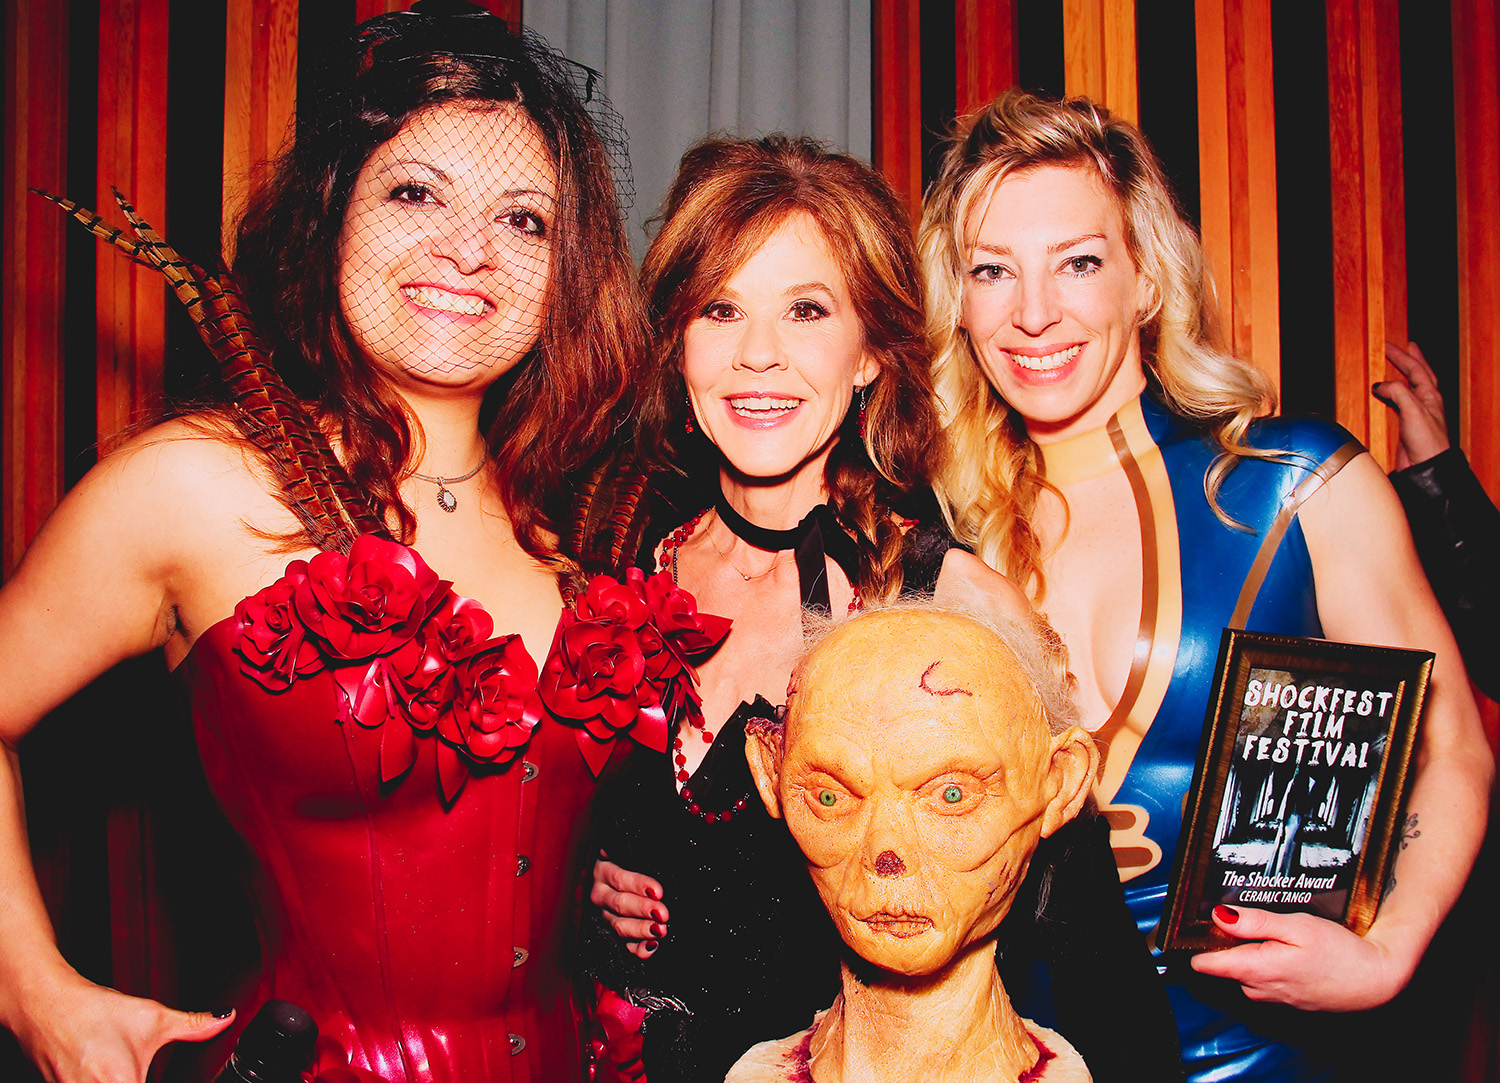 Director Patricia Chica, actress and animal activist Linda Blair and actress Jenimay Walker. CERAMIC TANGO received the 'Shocker Award of the Year' at the Shockfest Film Festival in Hollywood.